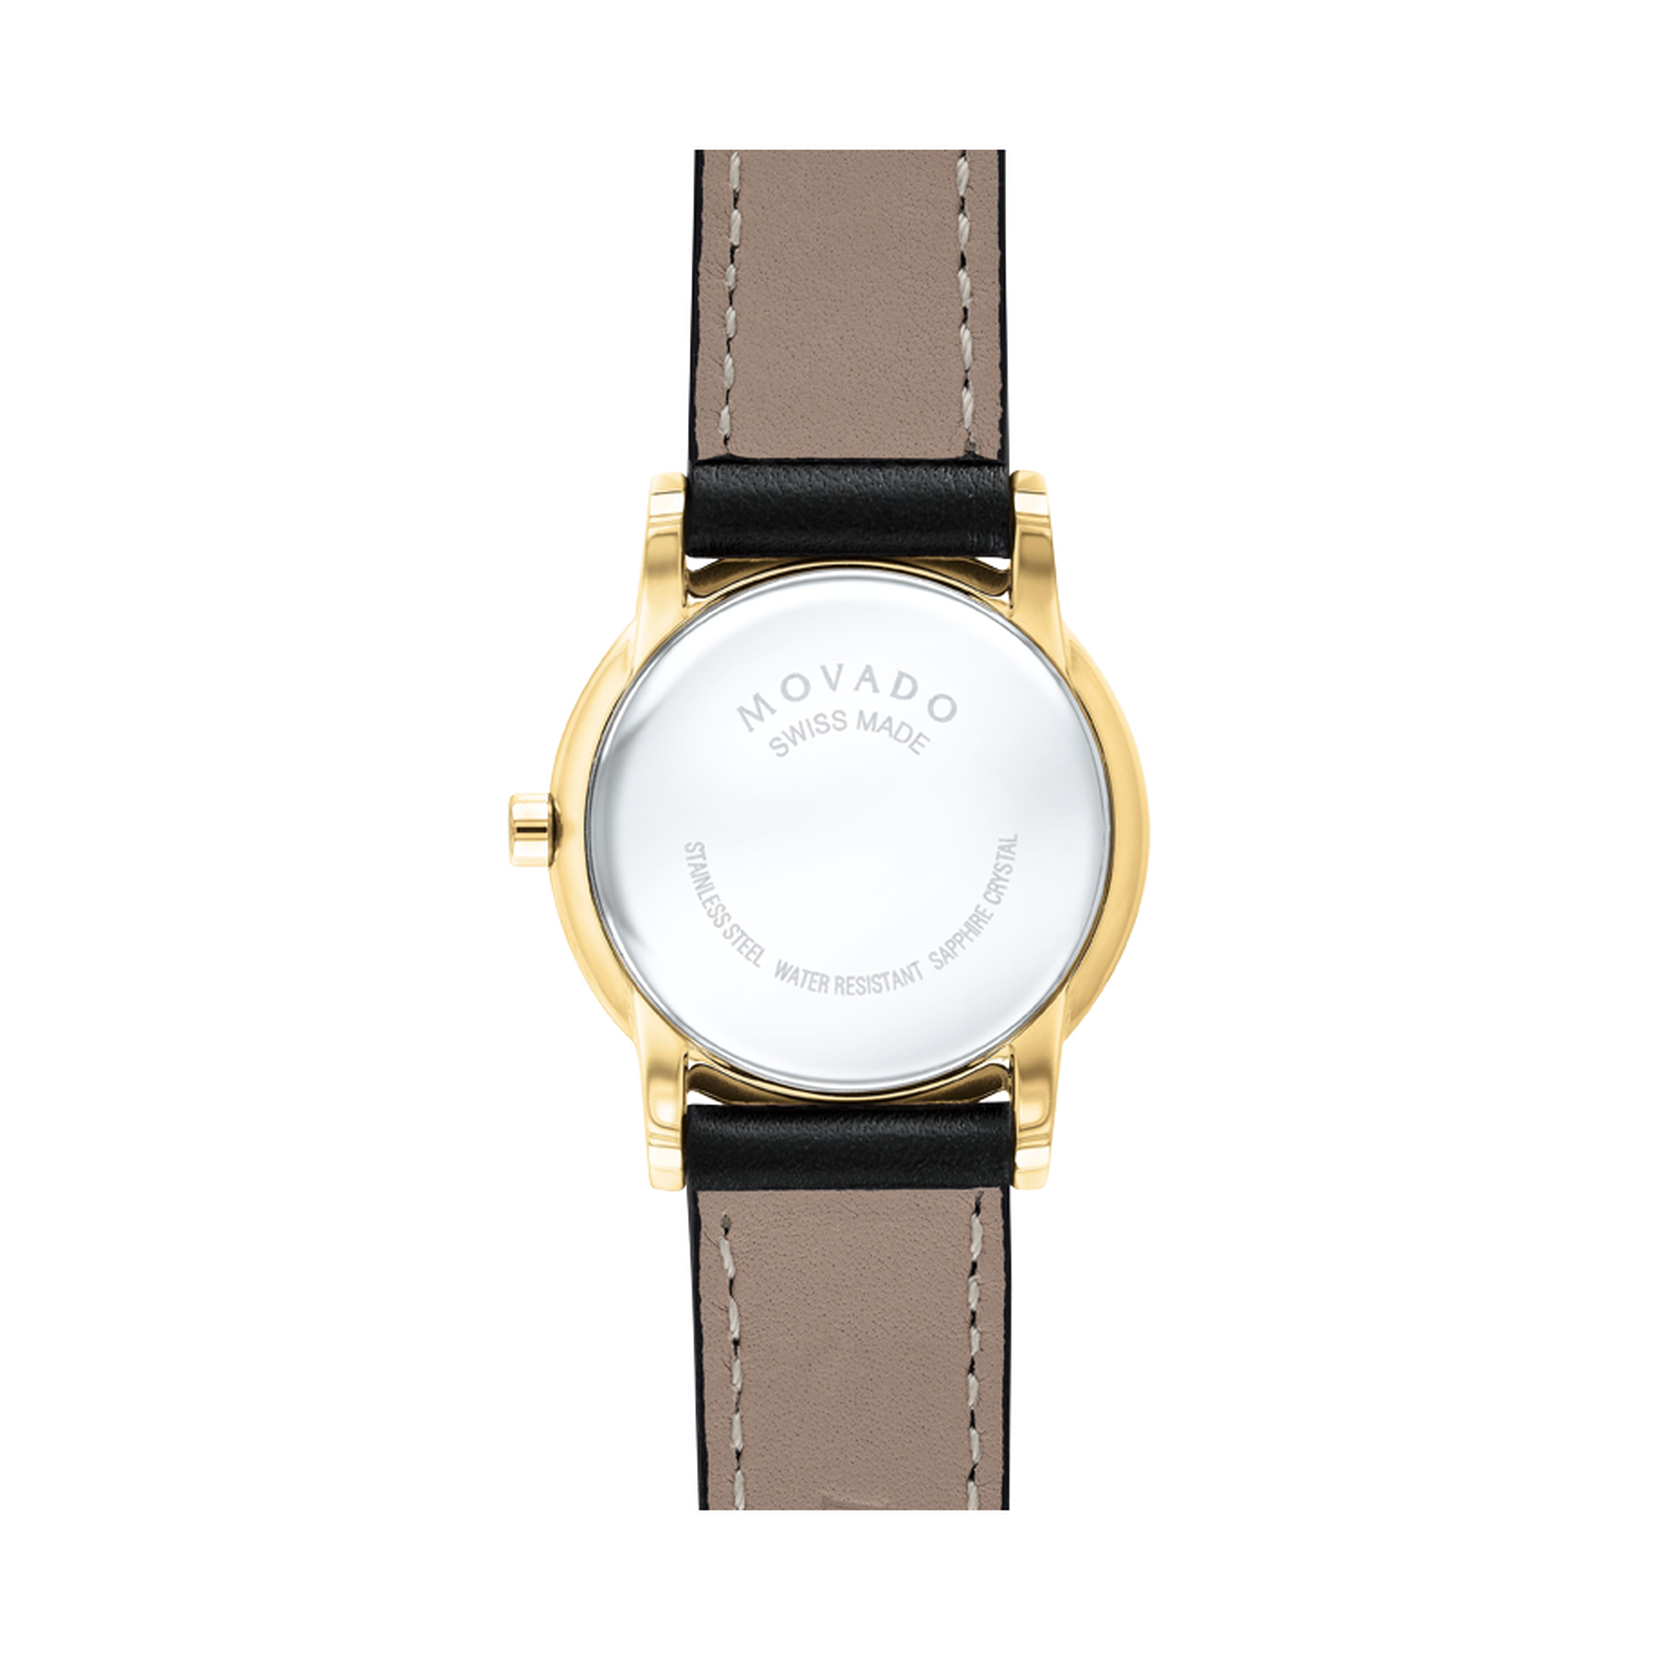 Ladies Museum Classic Watch 607564 Movado